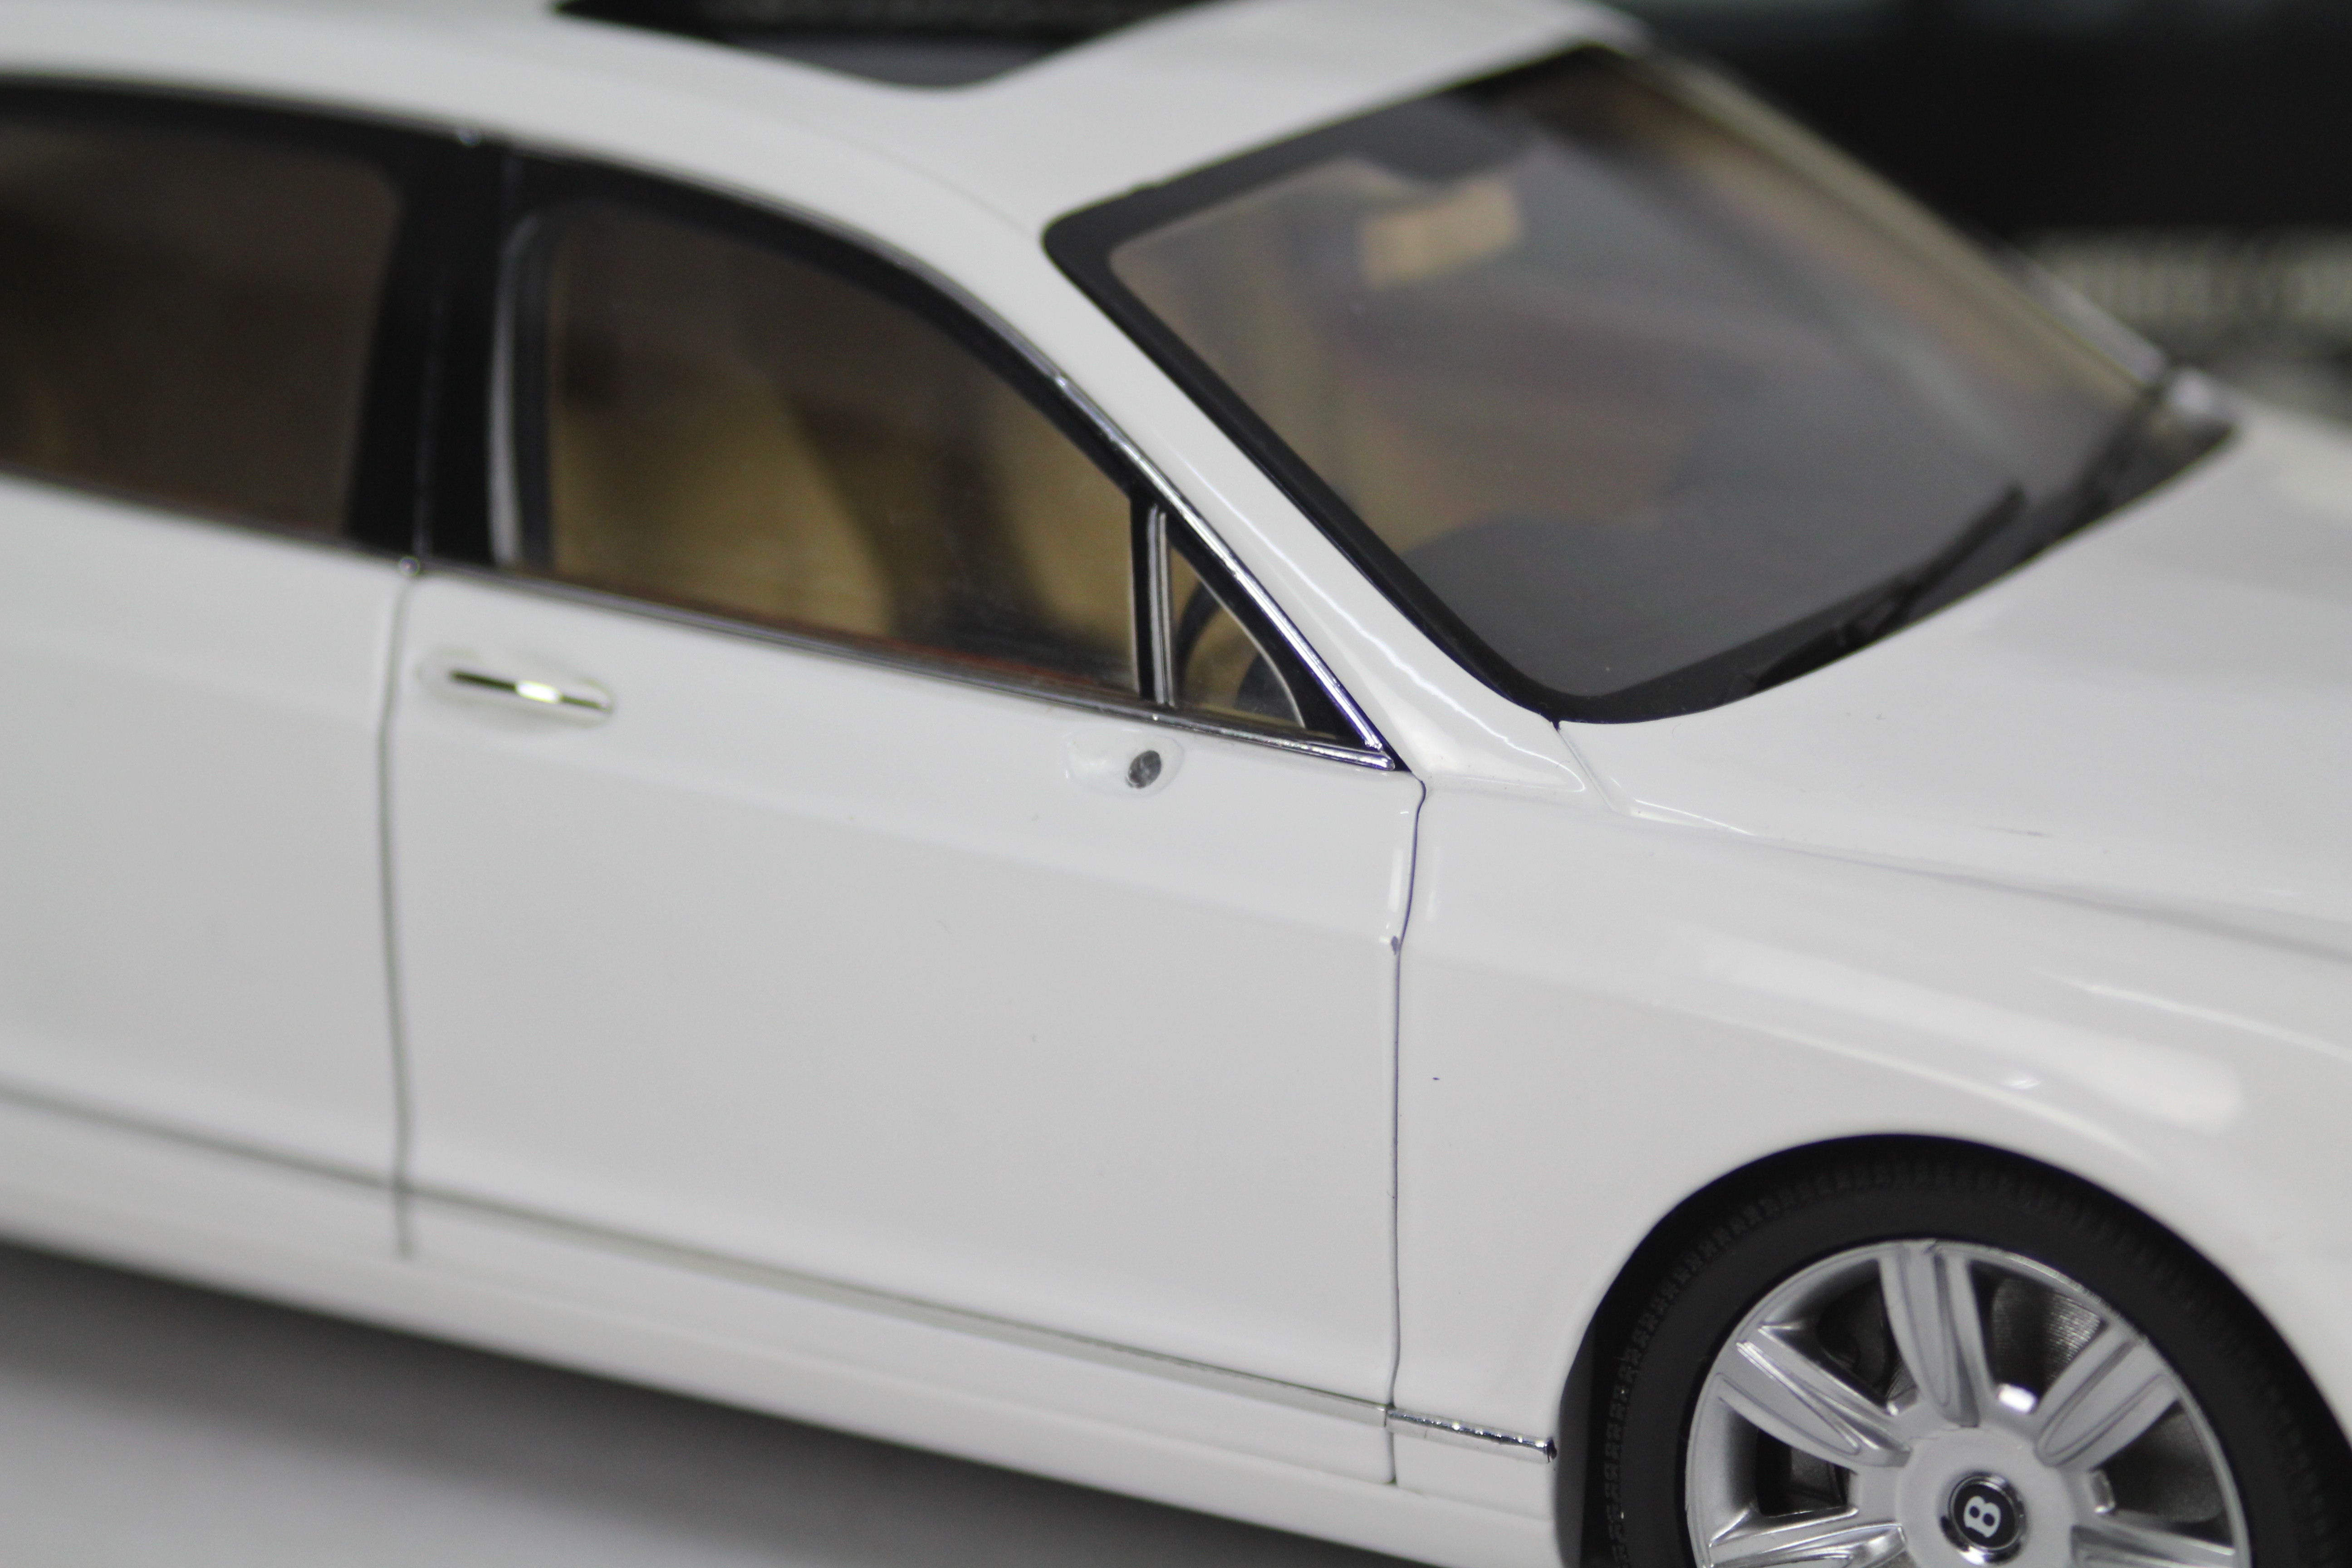 Minichamps - A boxed 1:18 scale Bentley - Image 6 of 6